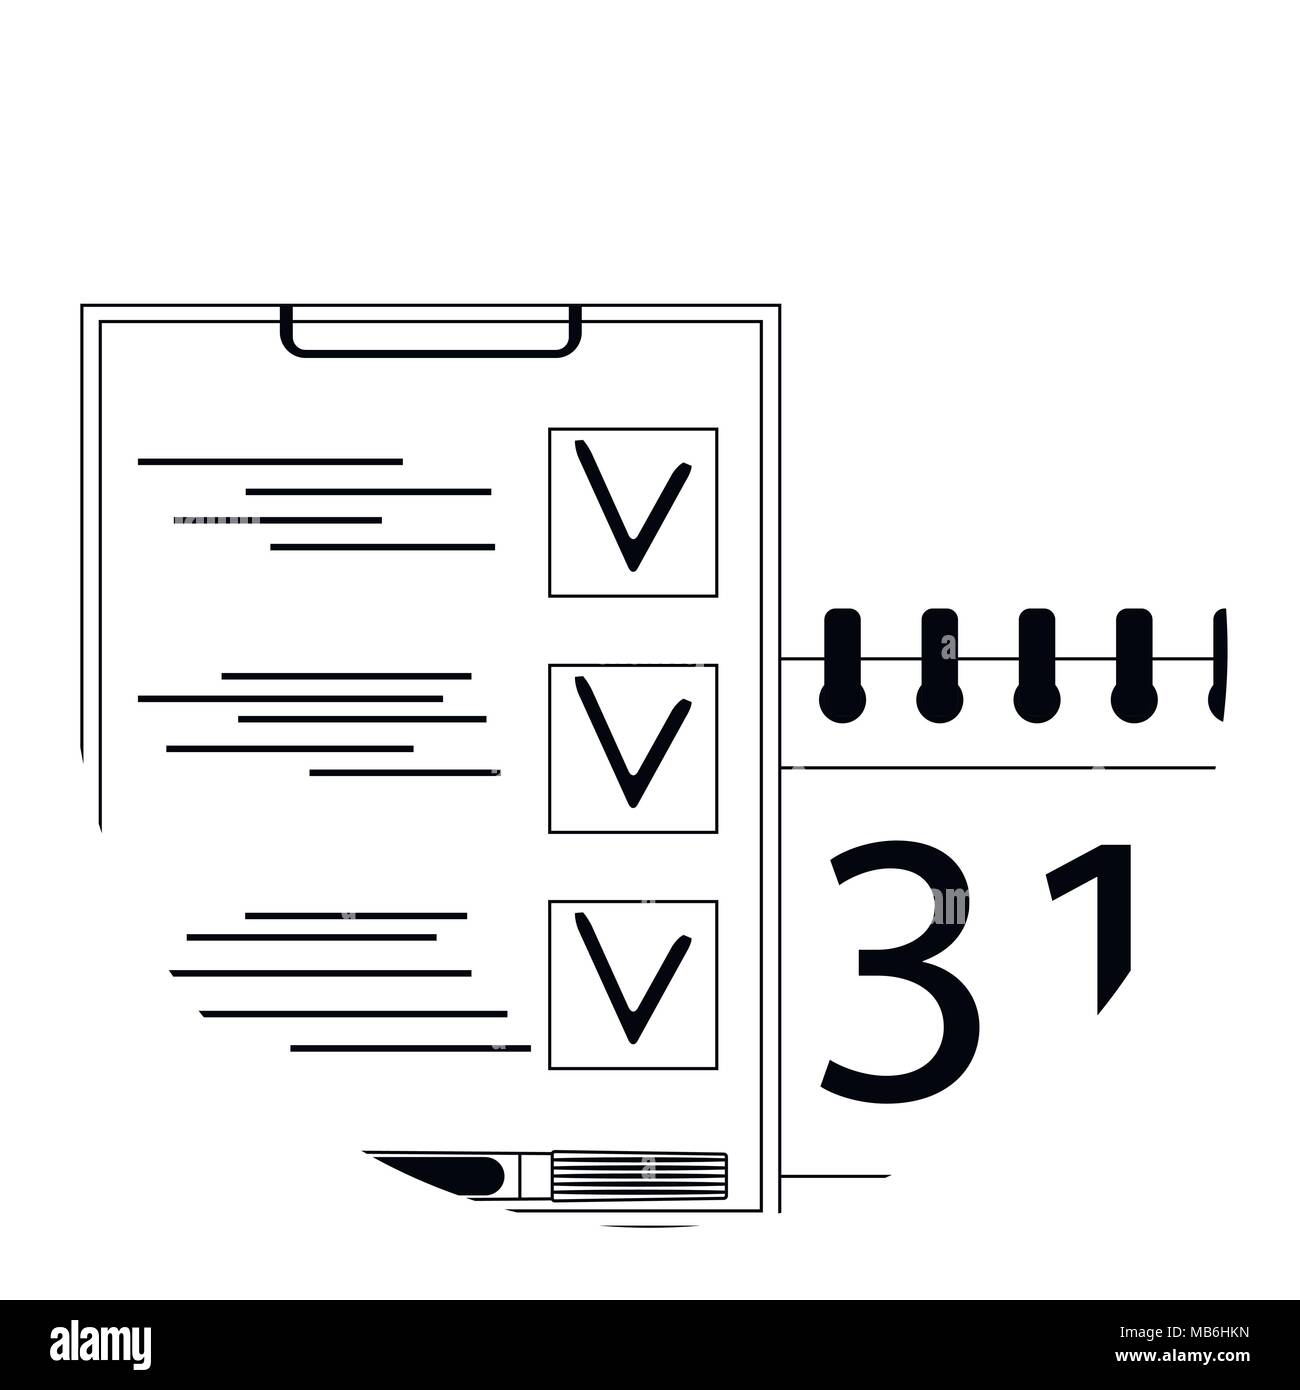 Planning icon app. Vector calendar and management business illustration Stock Vector